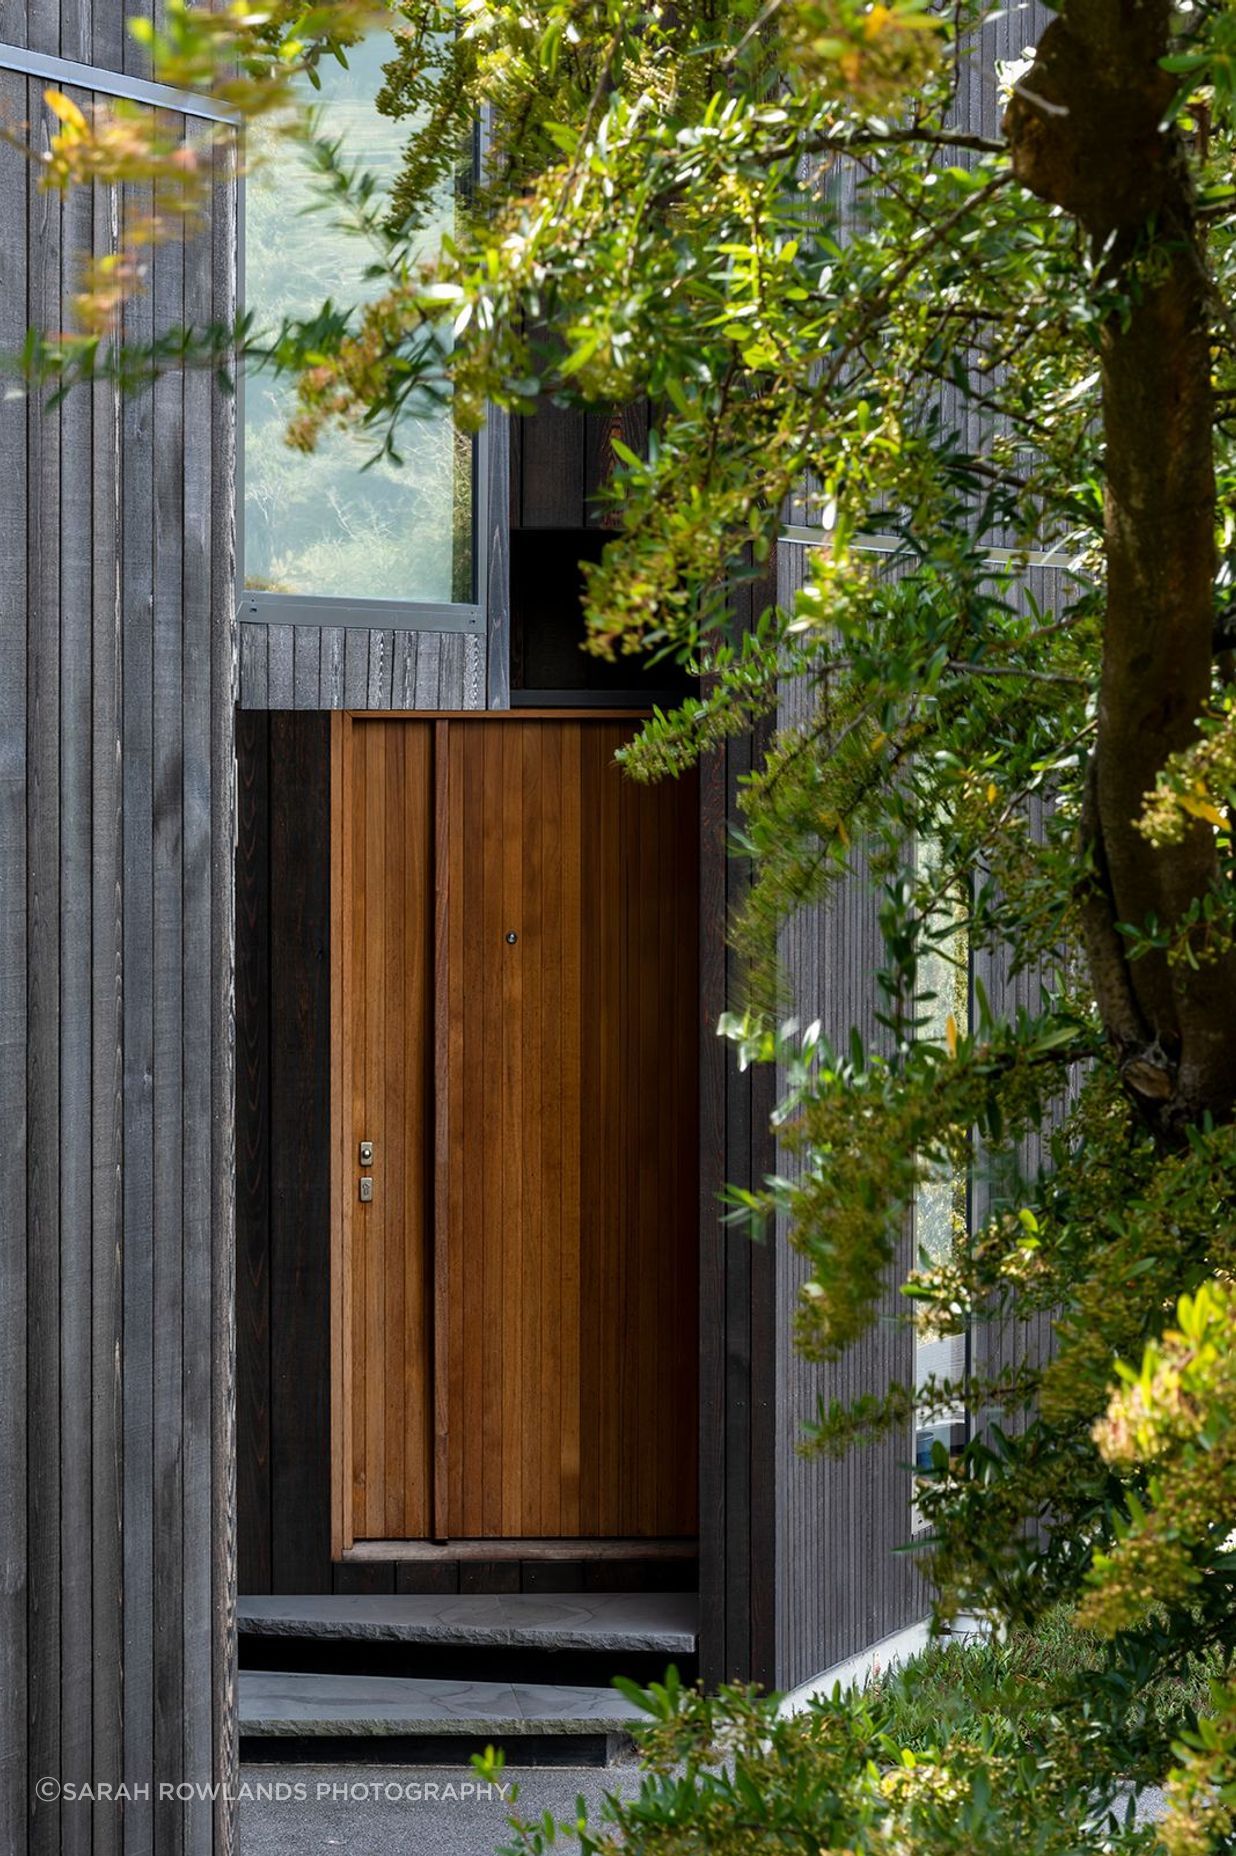 The discreet entryway is folded into the house, with a contrasting stain front door to mark the entrance.